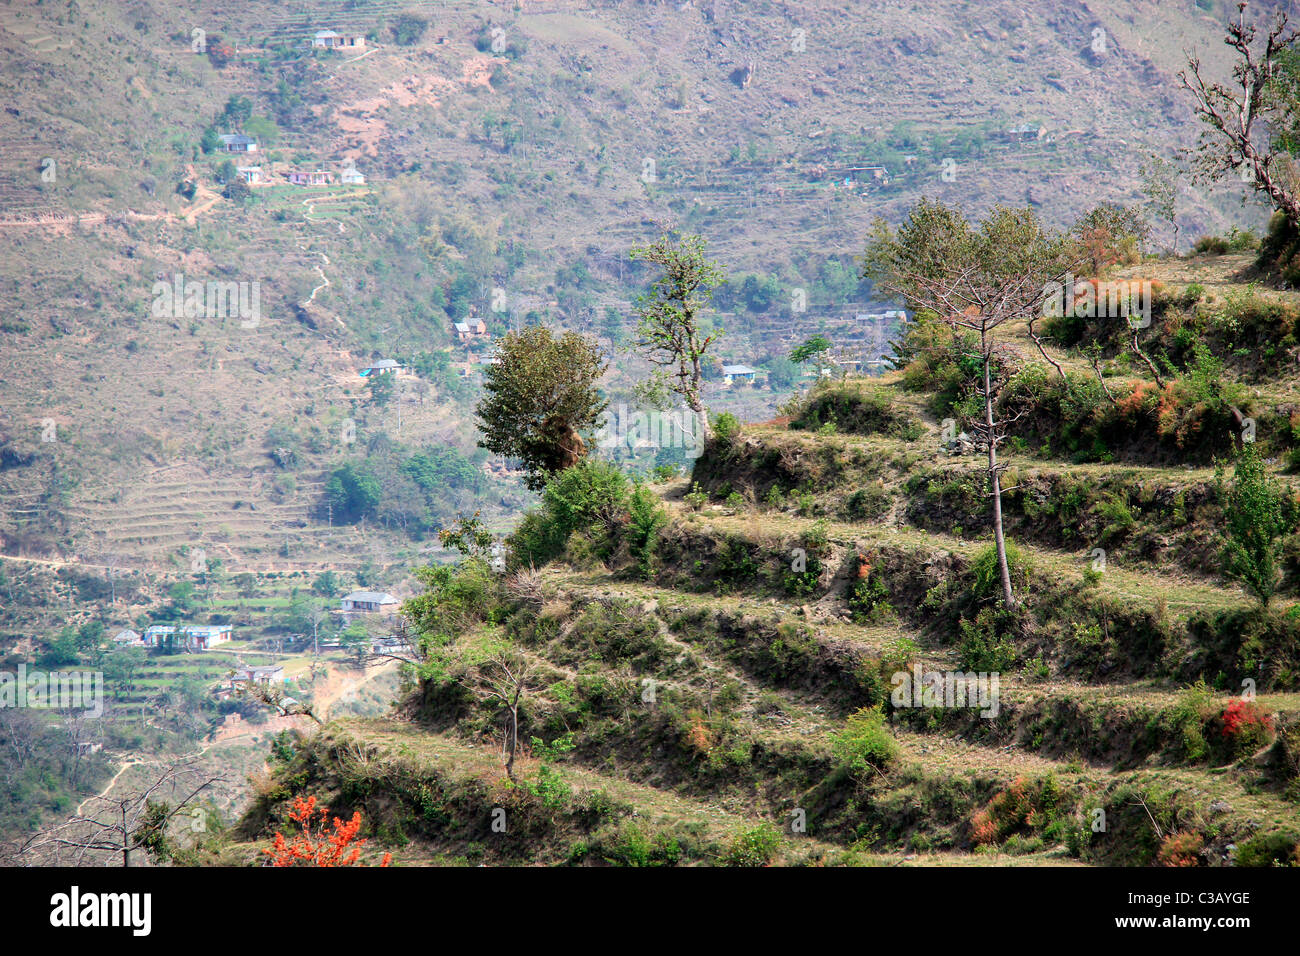 Stepped cultivation in hilly terrain of Himachal Pradesh, india Stock Photo